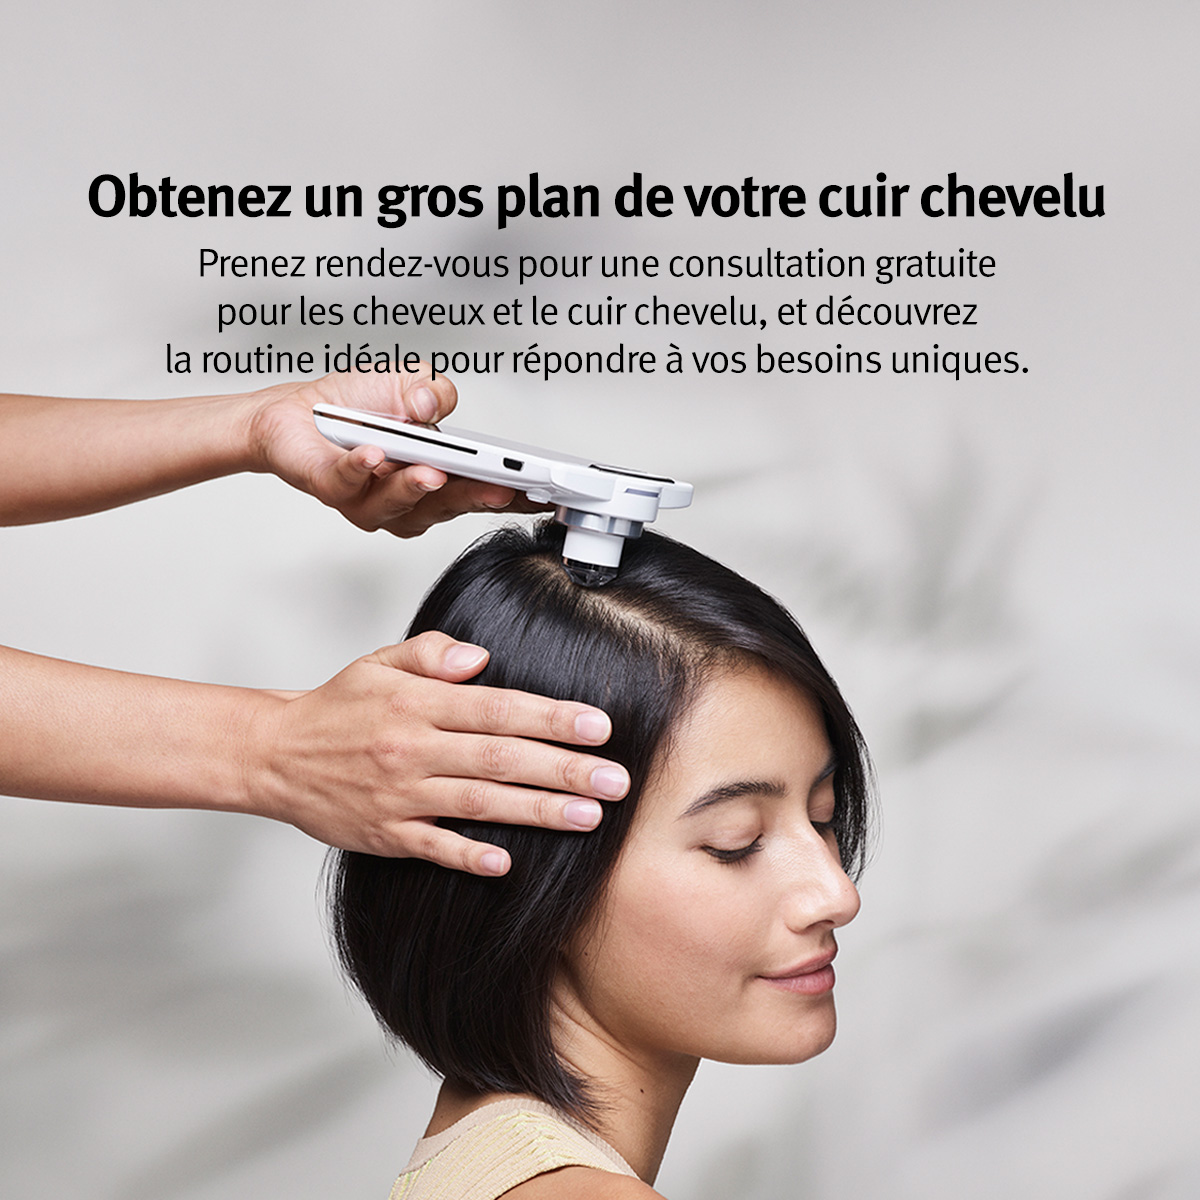 Images Aveda Store